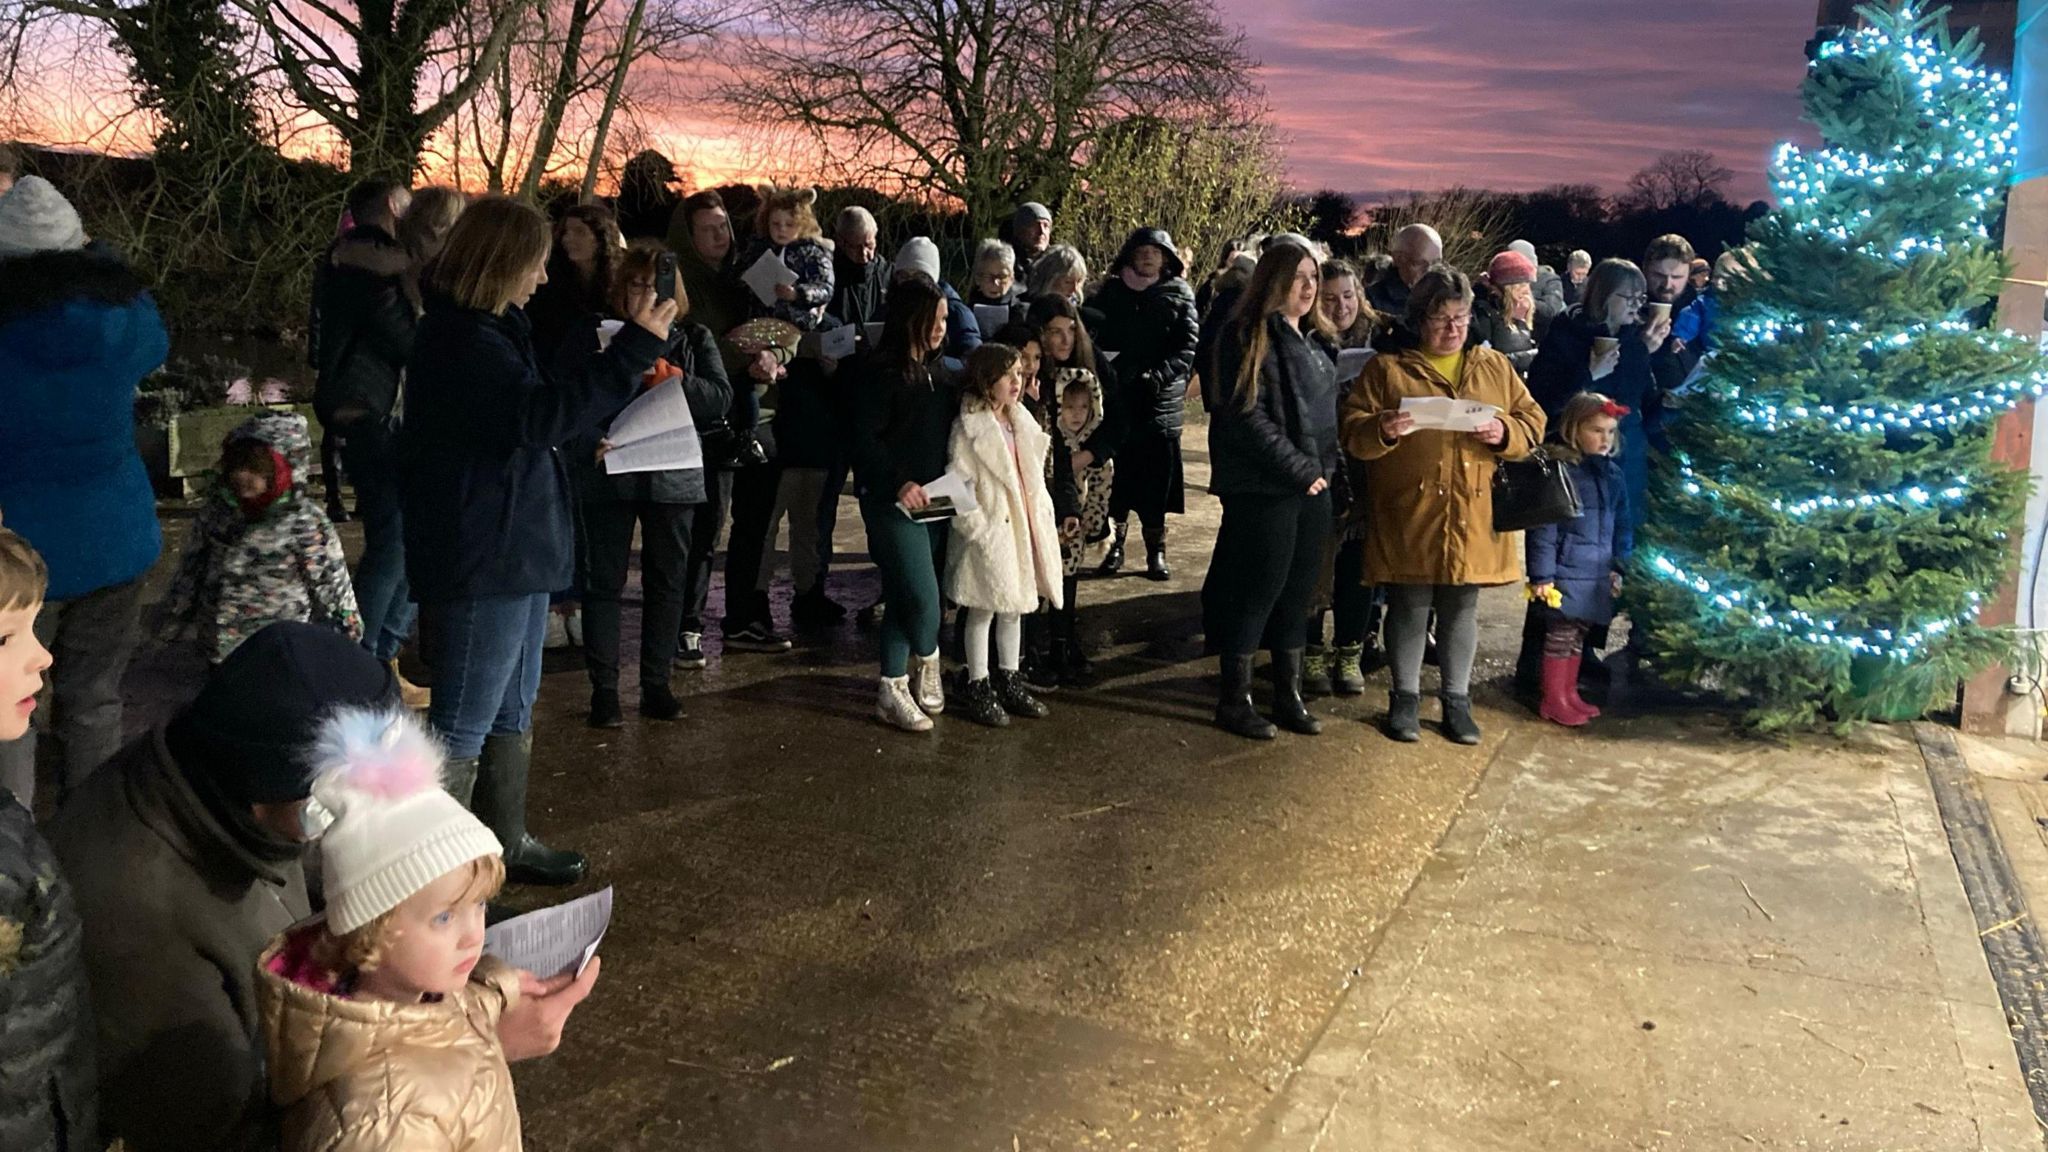 Families at a Carols with the Cows event in Norfolk